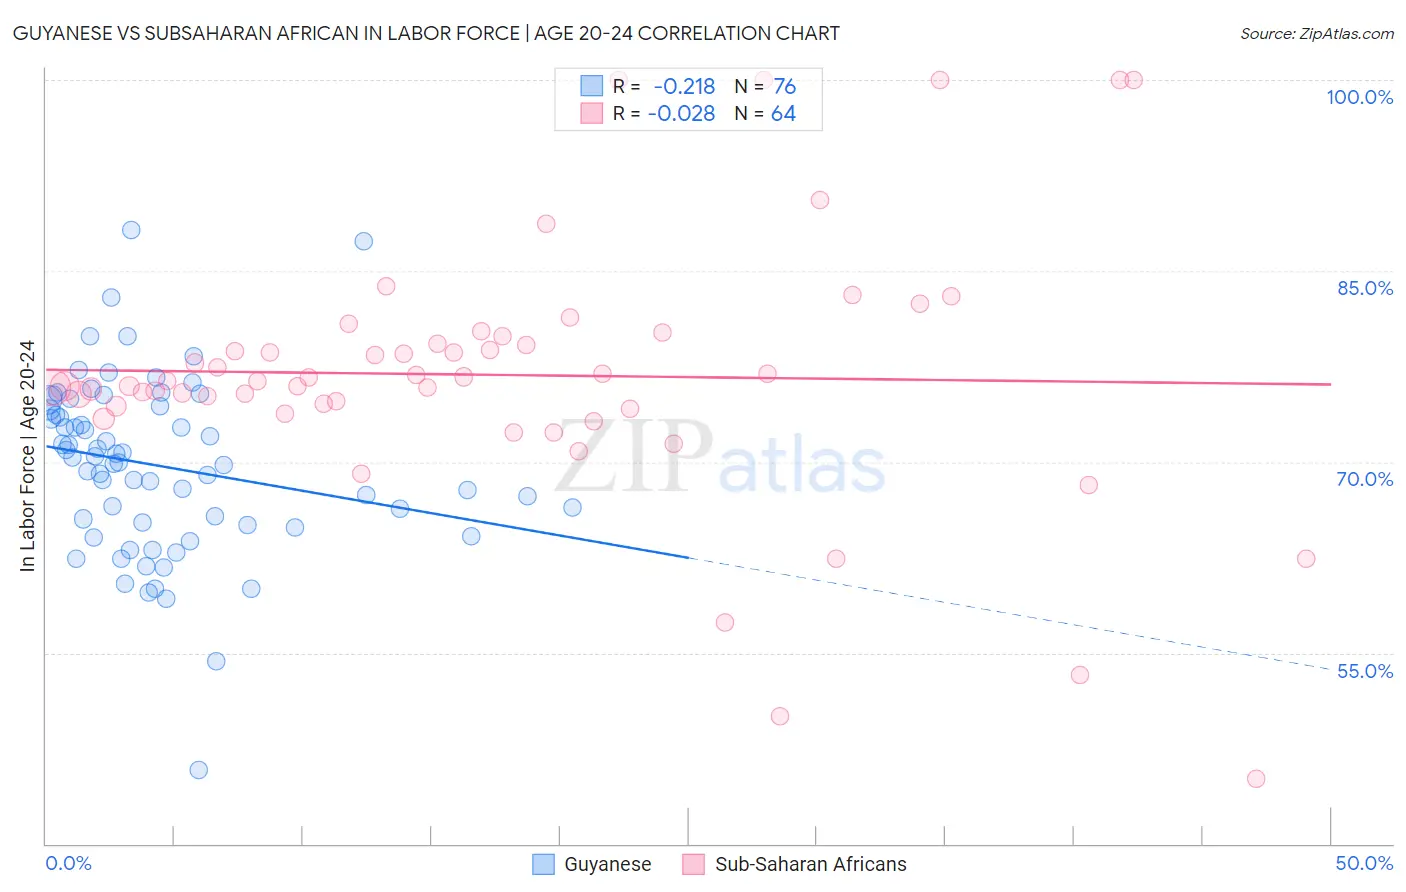 Guyanese vs Subsaharan African In Labor Force | Age 20-24